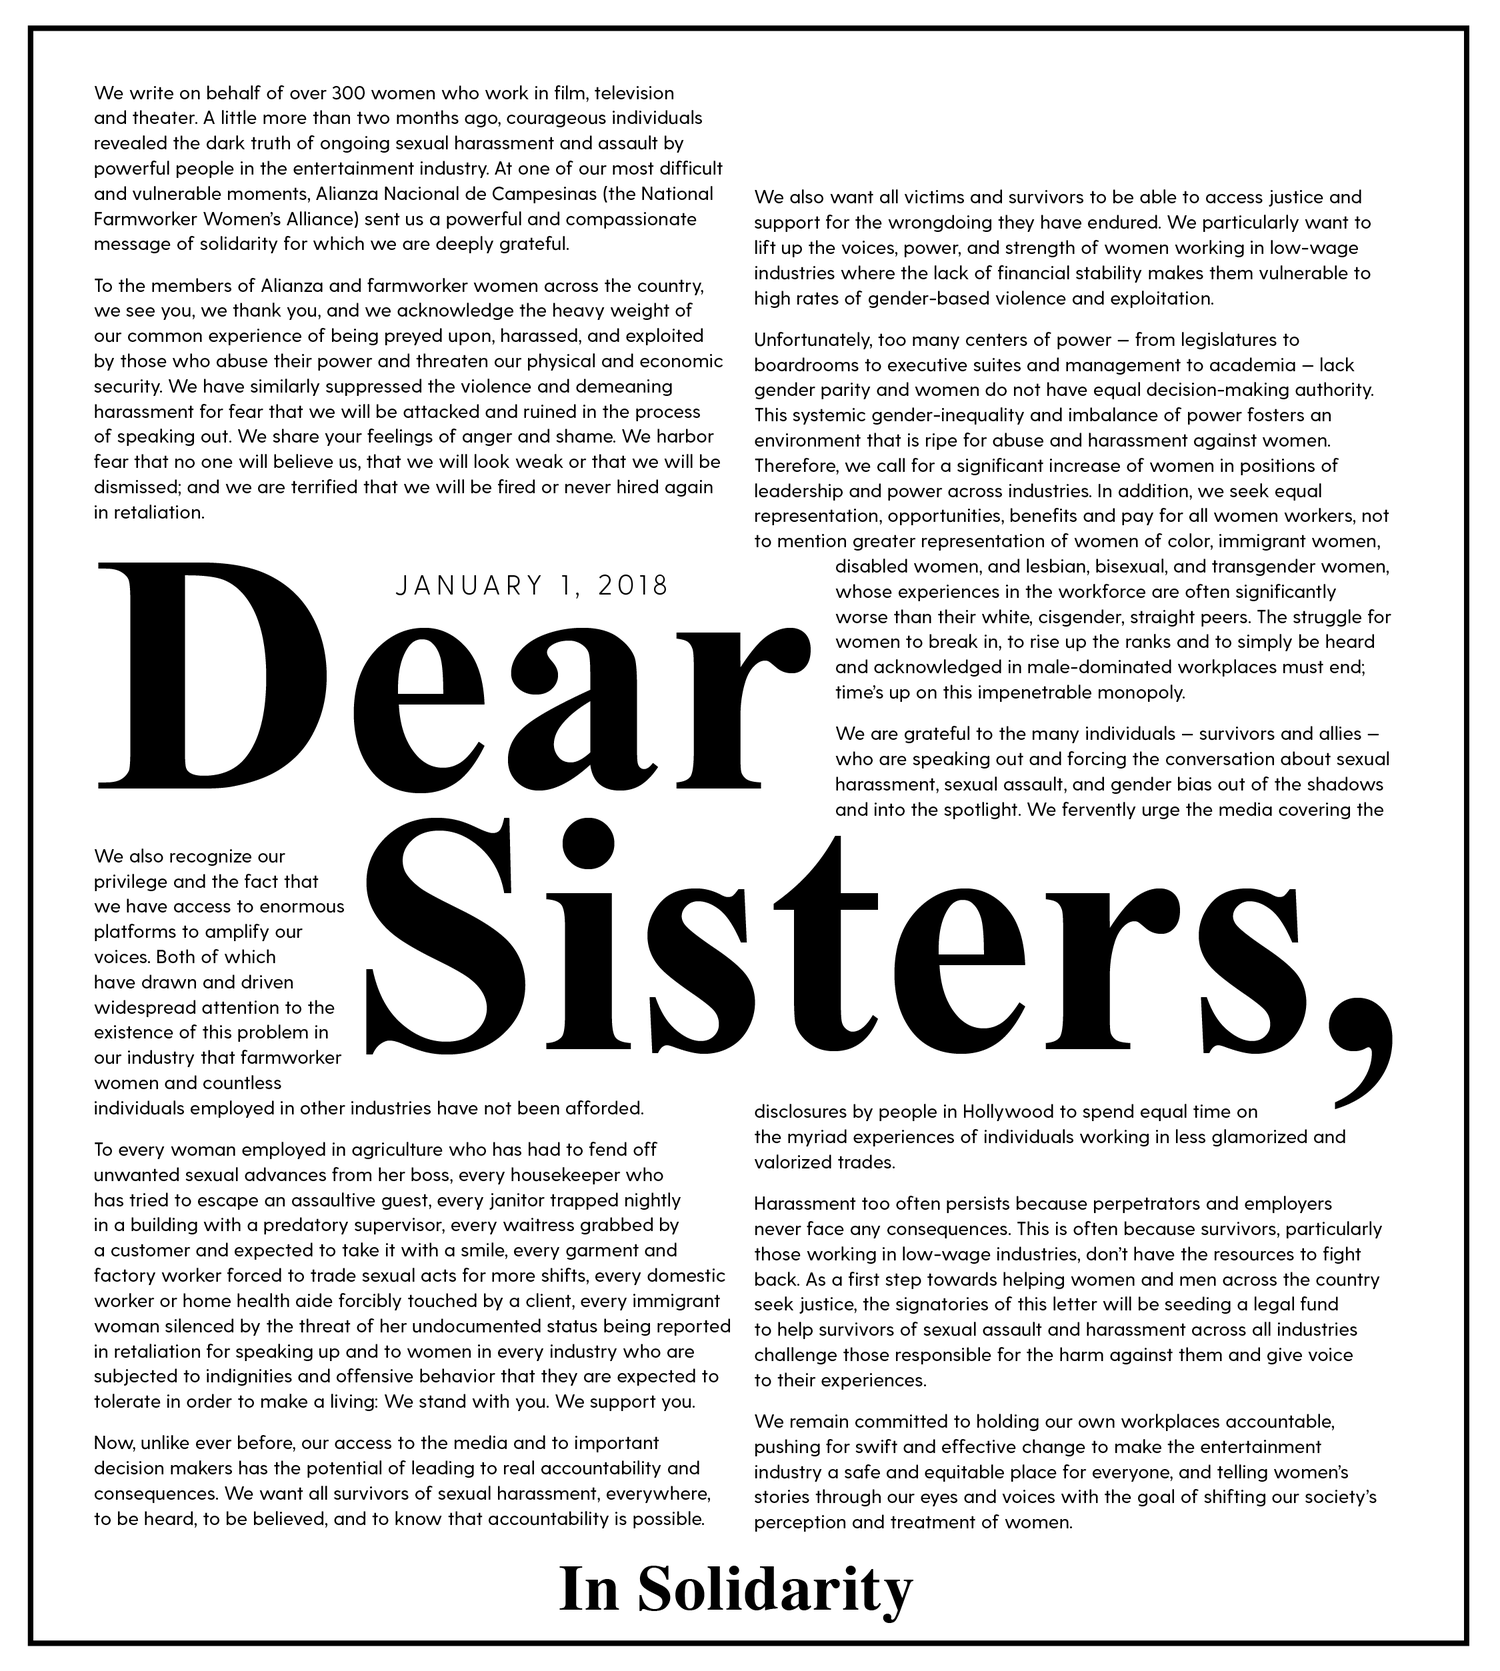 Time's Up - Letter of Solidarity